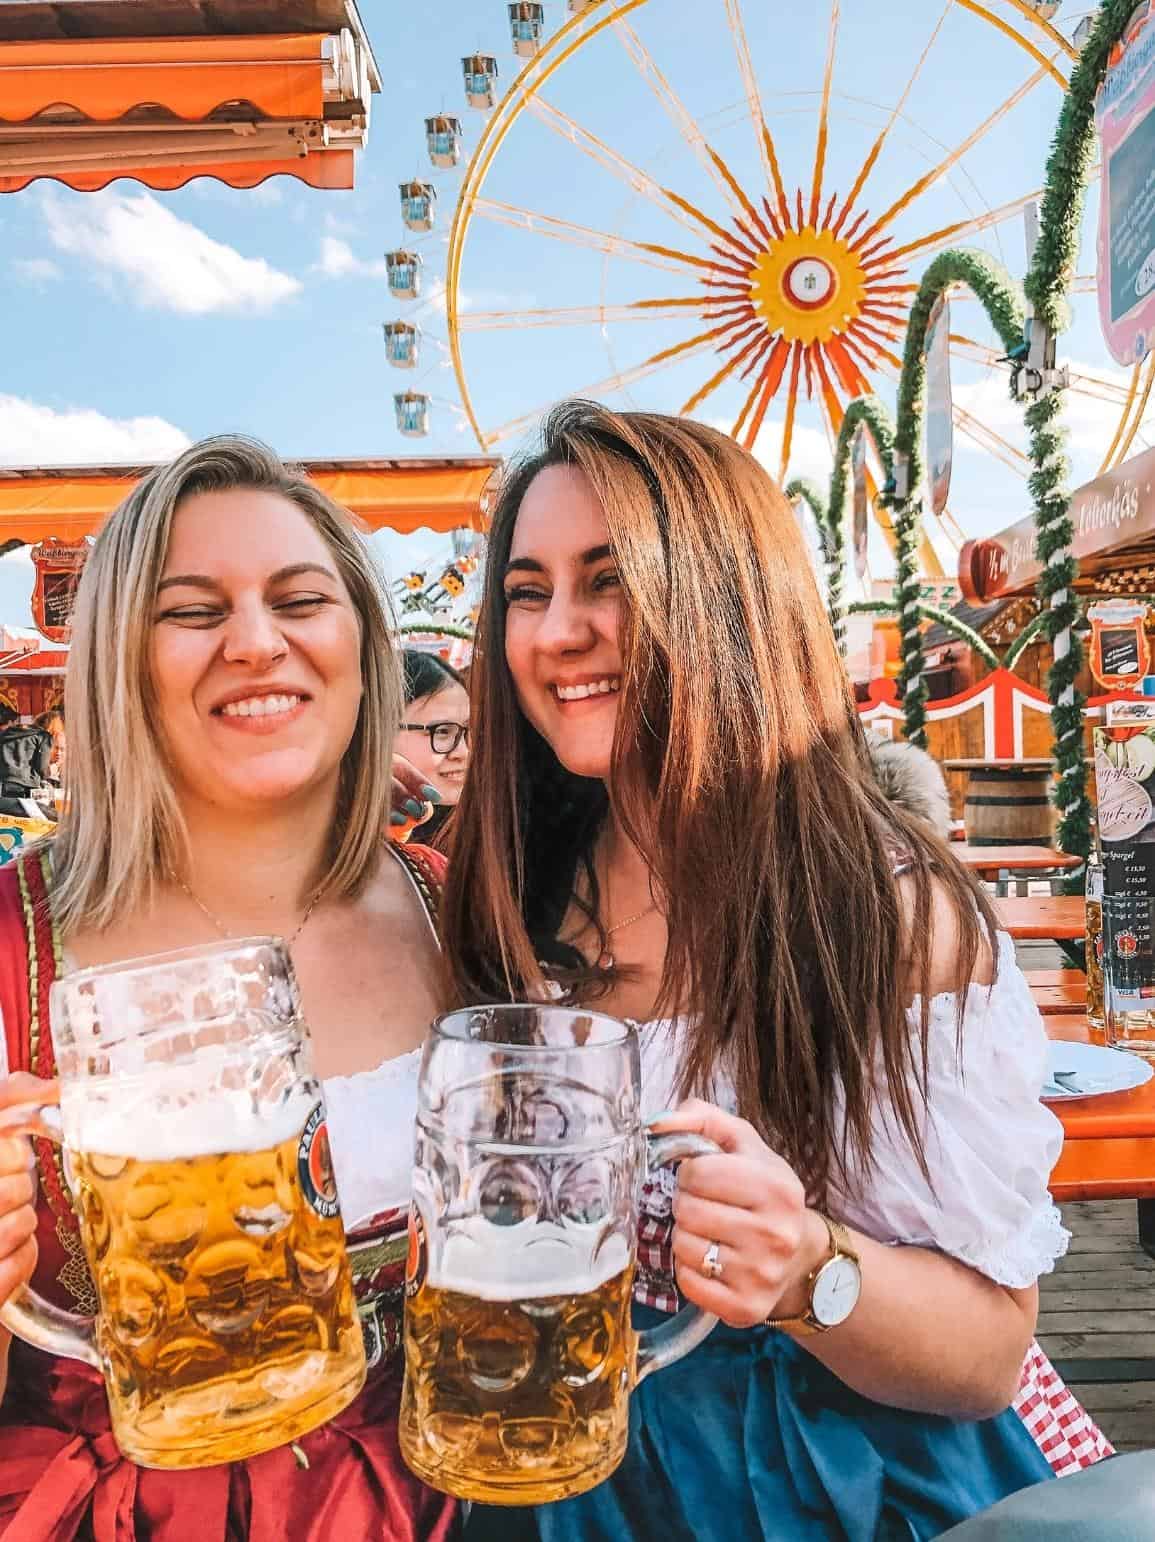 Me and a friend "prosting" our beer steins at Munich's Oktoberfest